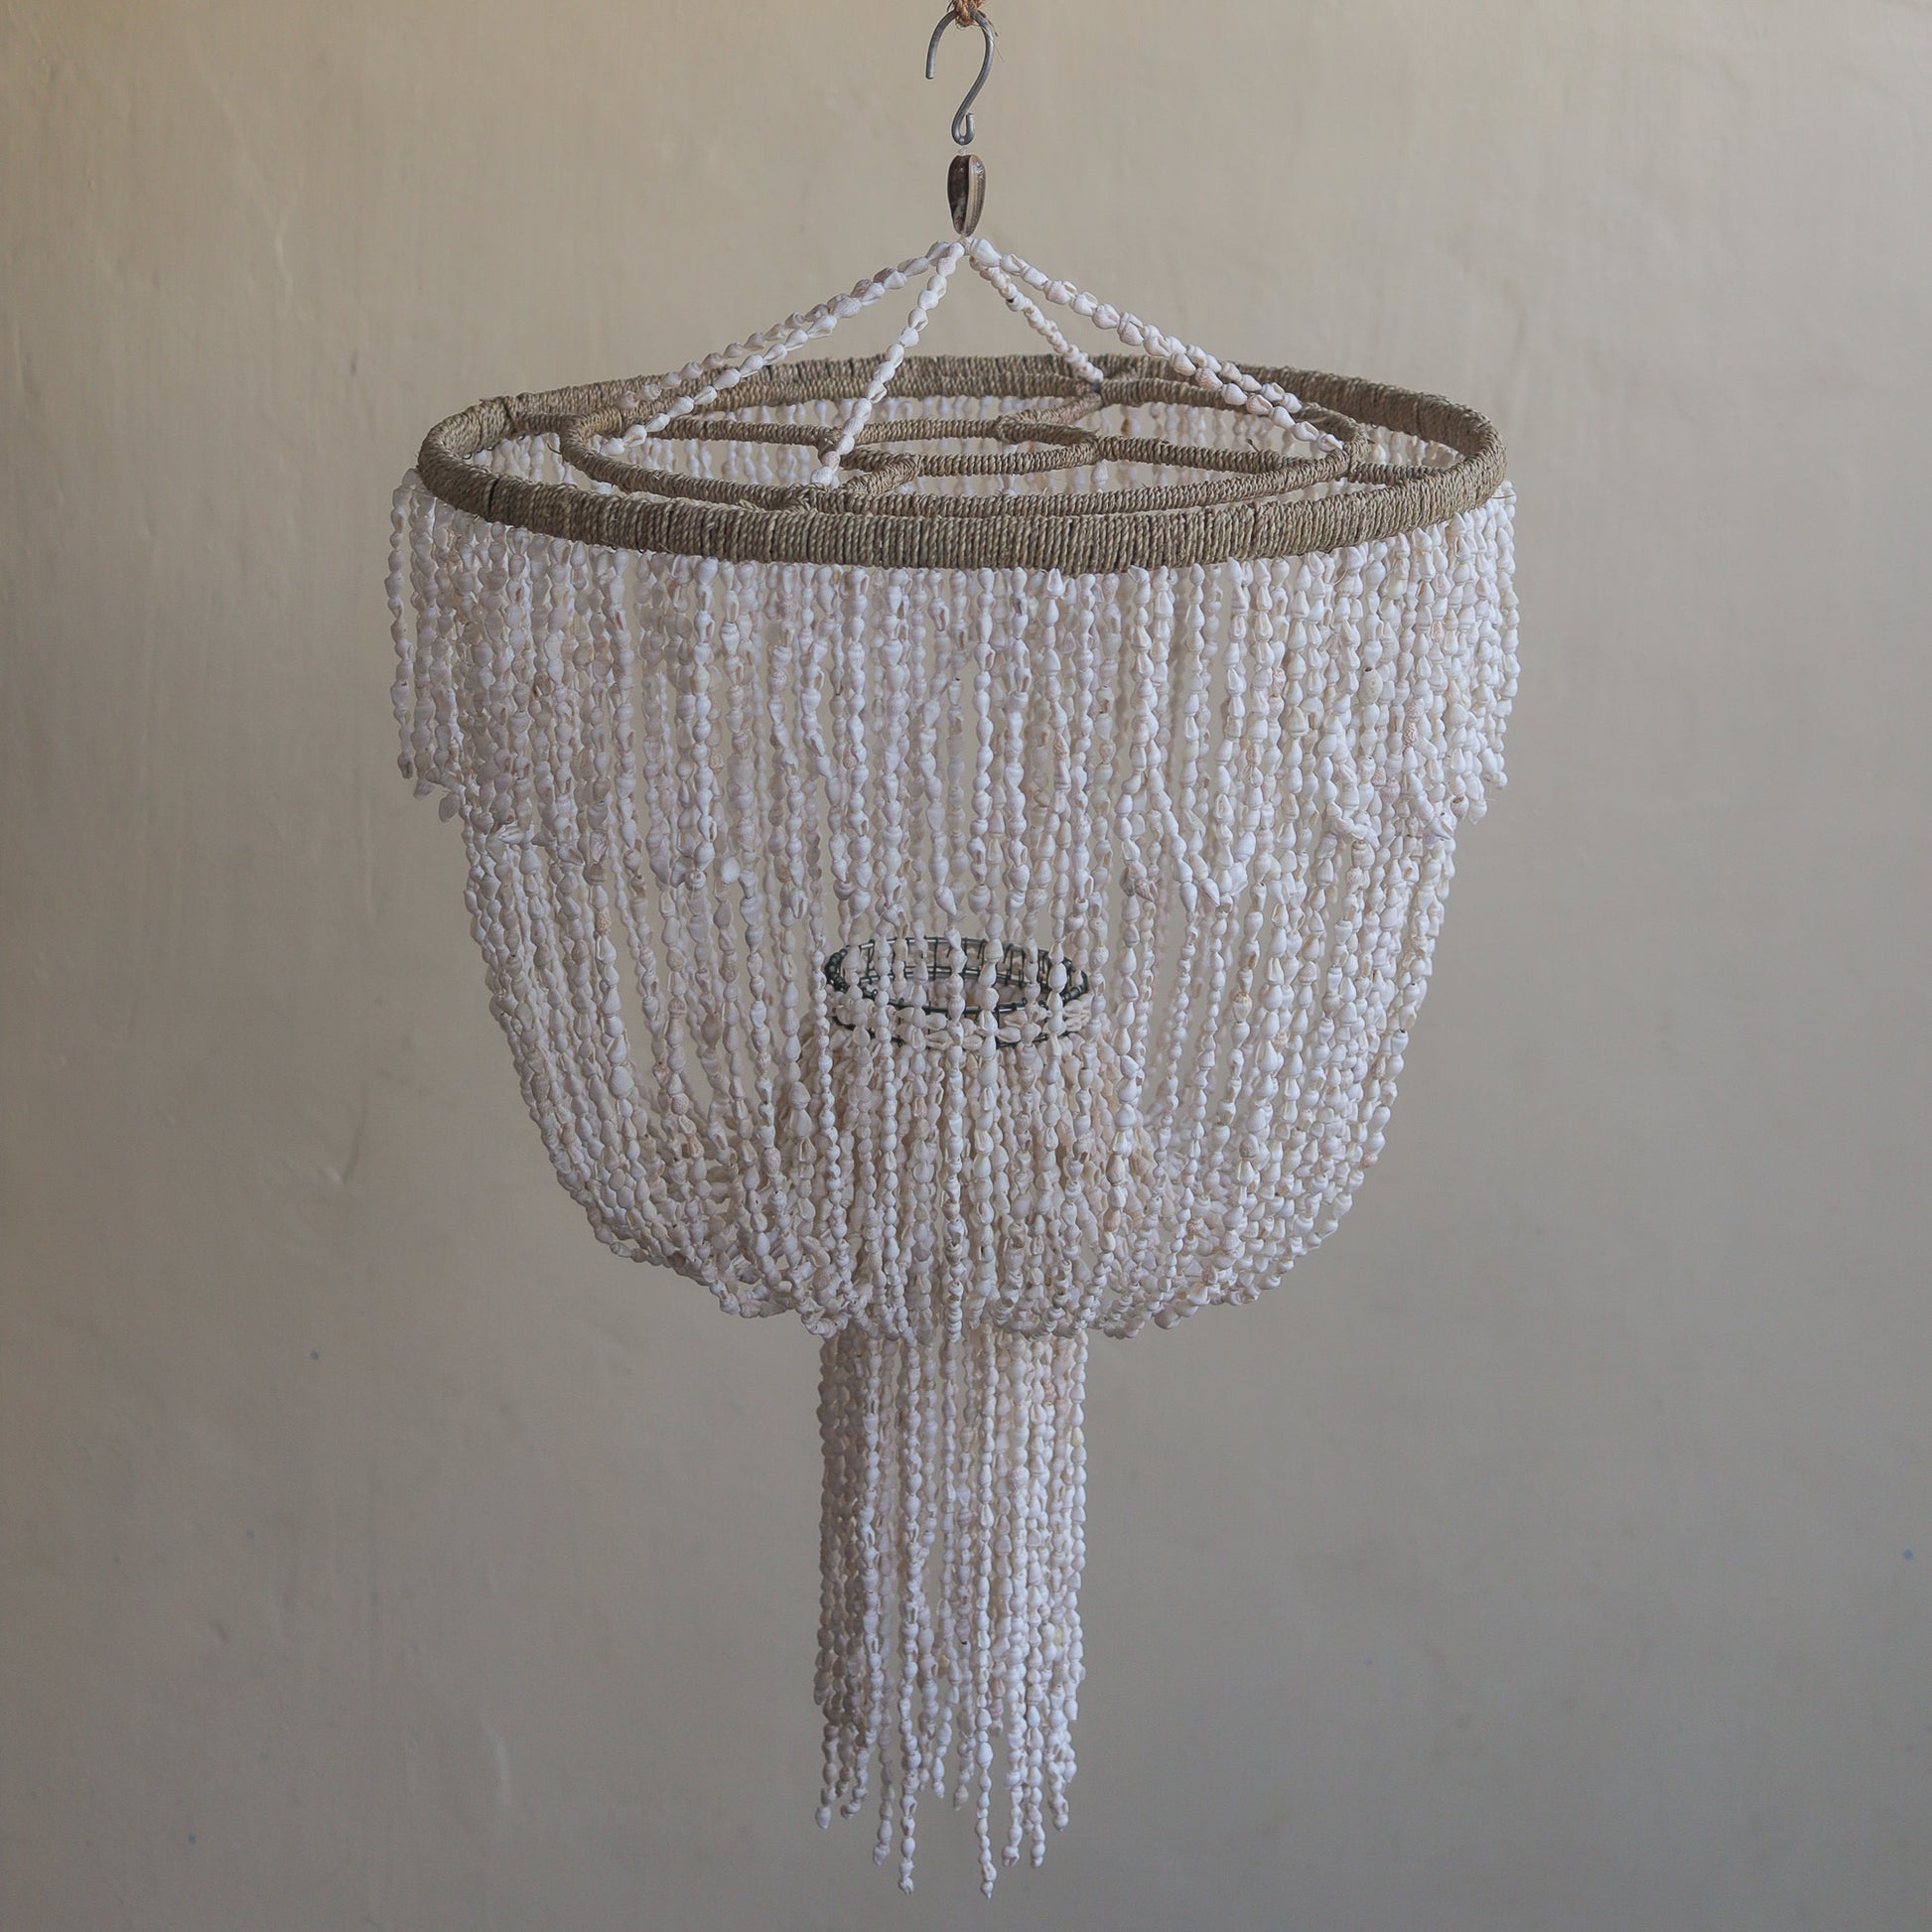 small Chandelier made by seashell